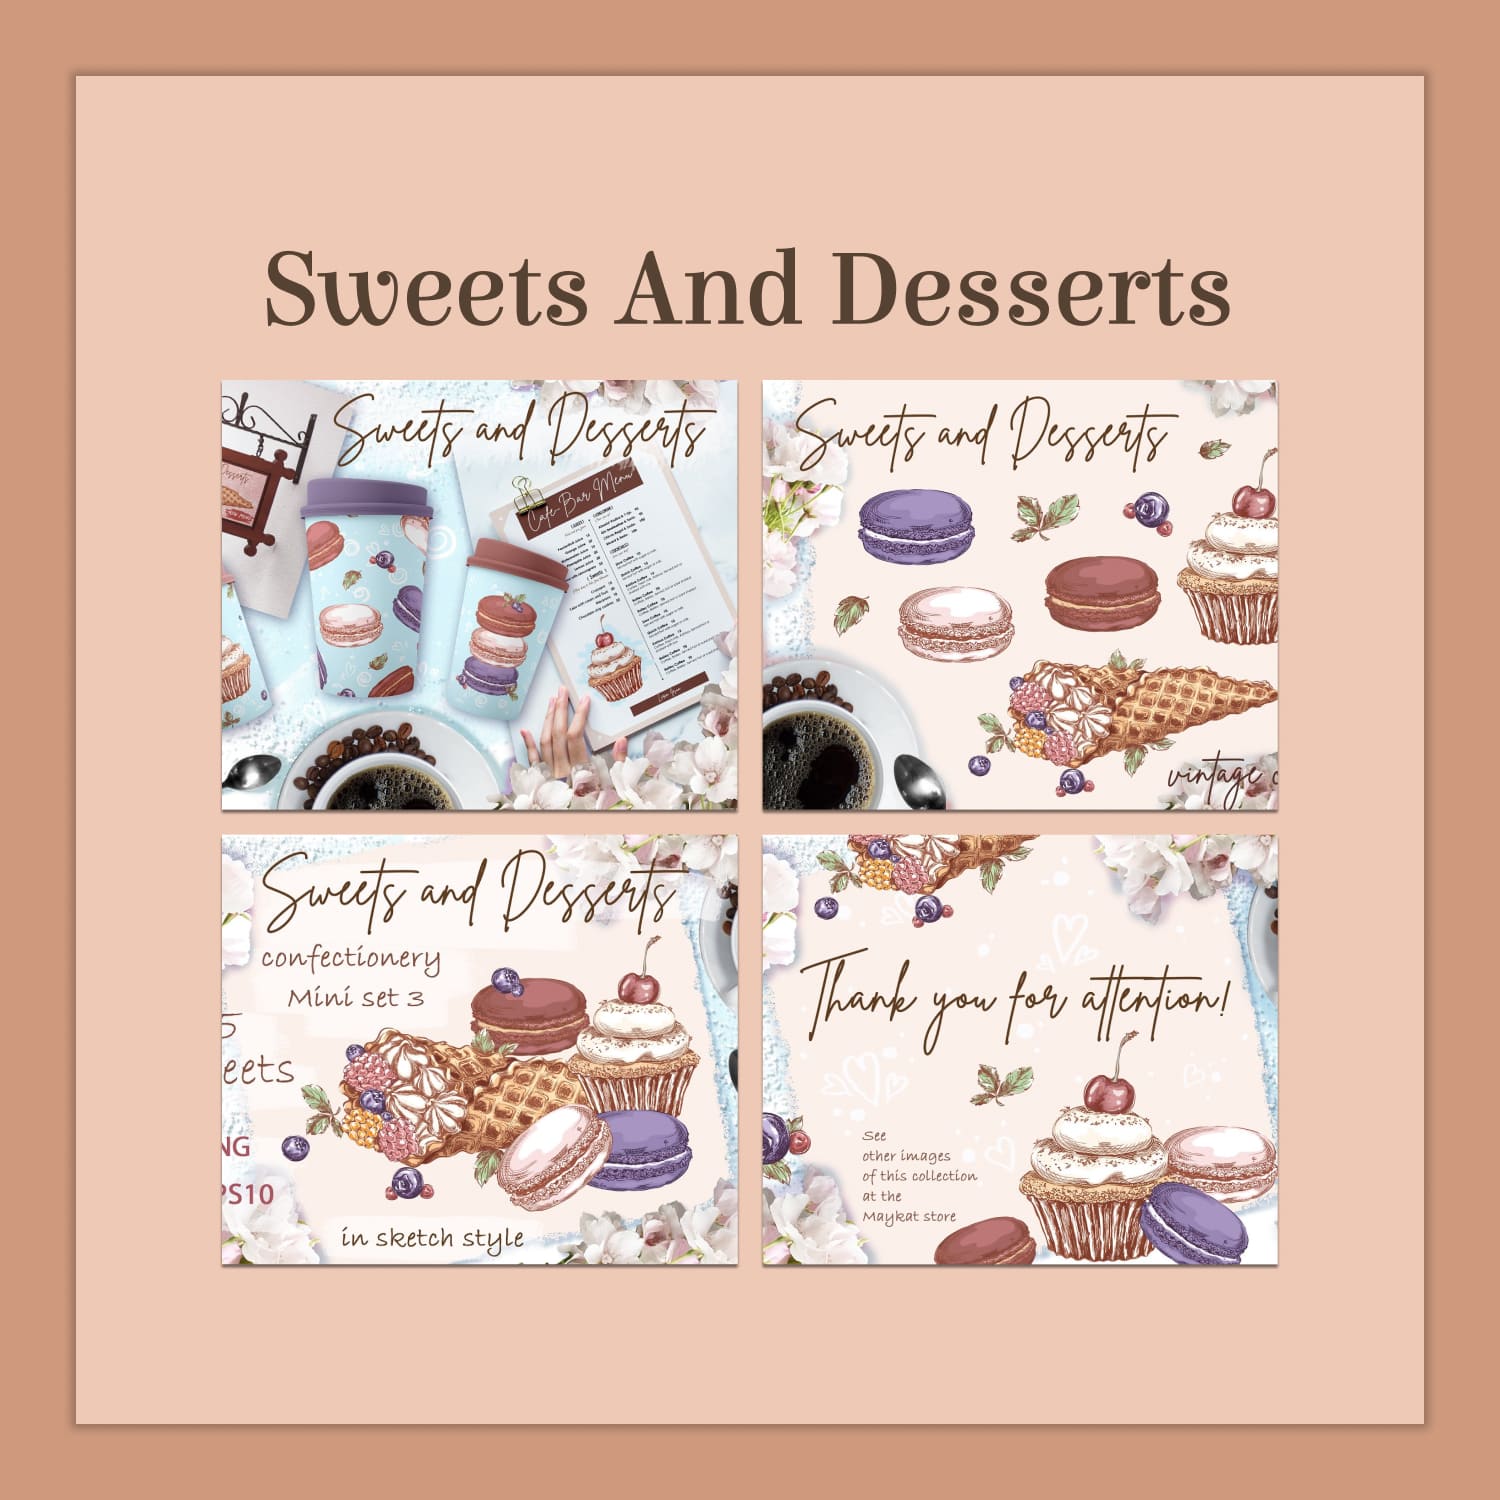 Sweets and desserts. mini set - main image preview.